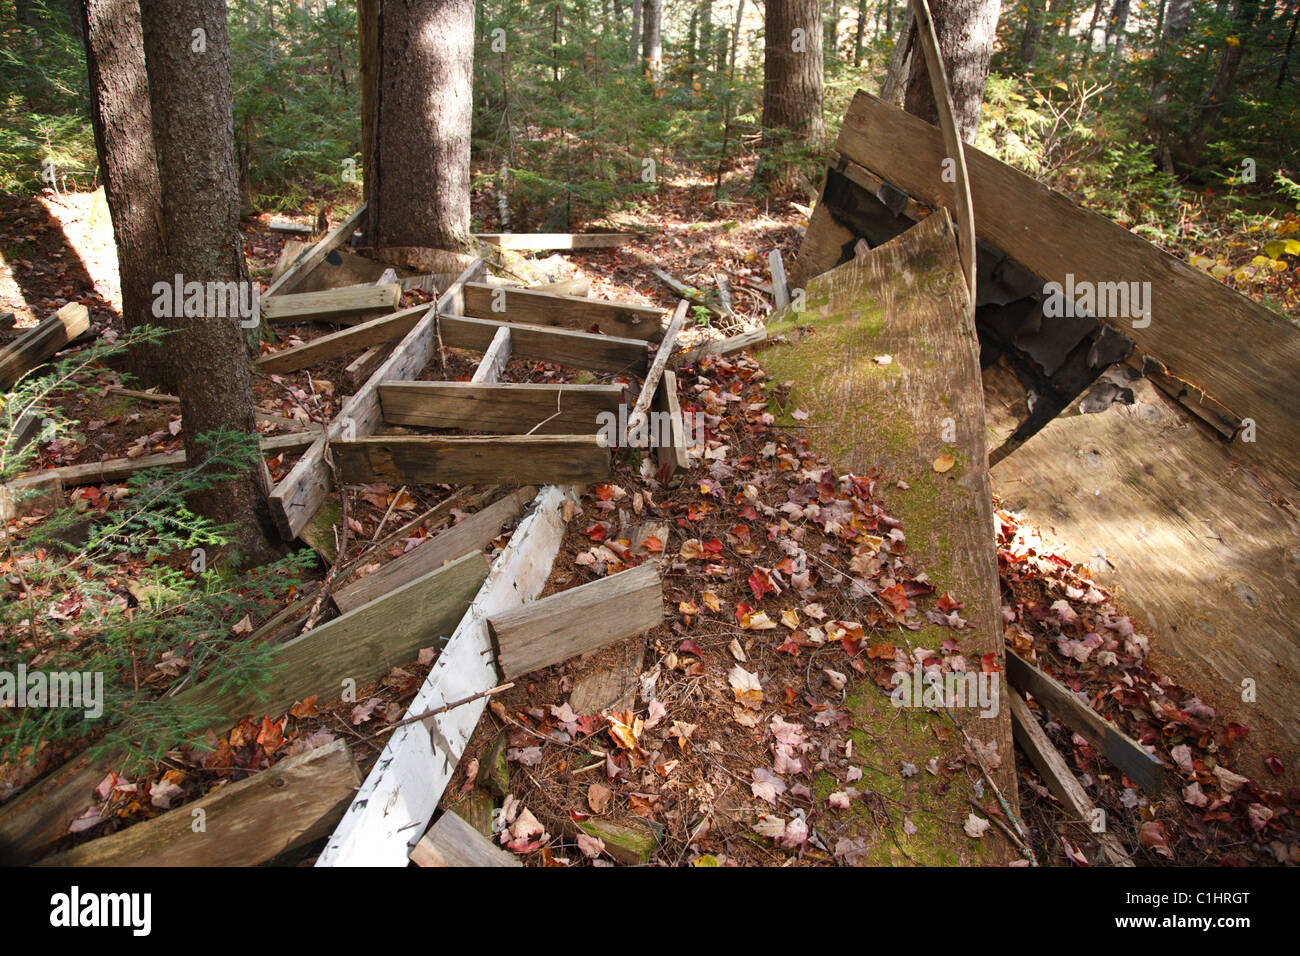 Human Impact (old campsite) in softwood forest in the White Mountain National Forest of New Hampshire Stock Photo